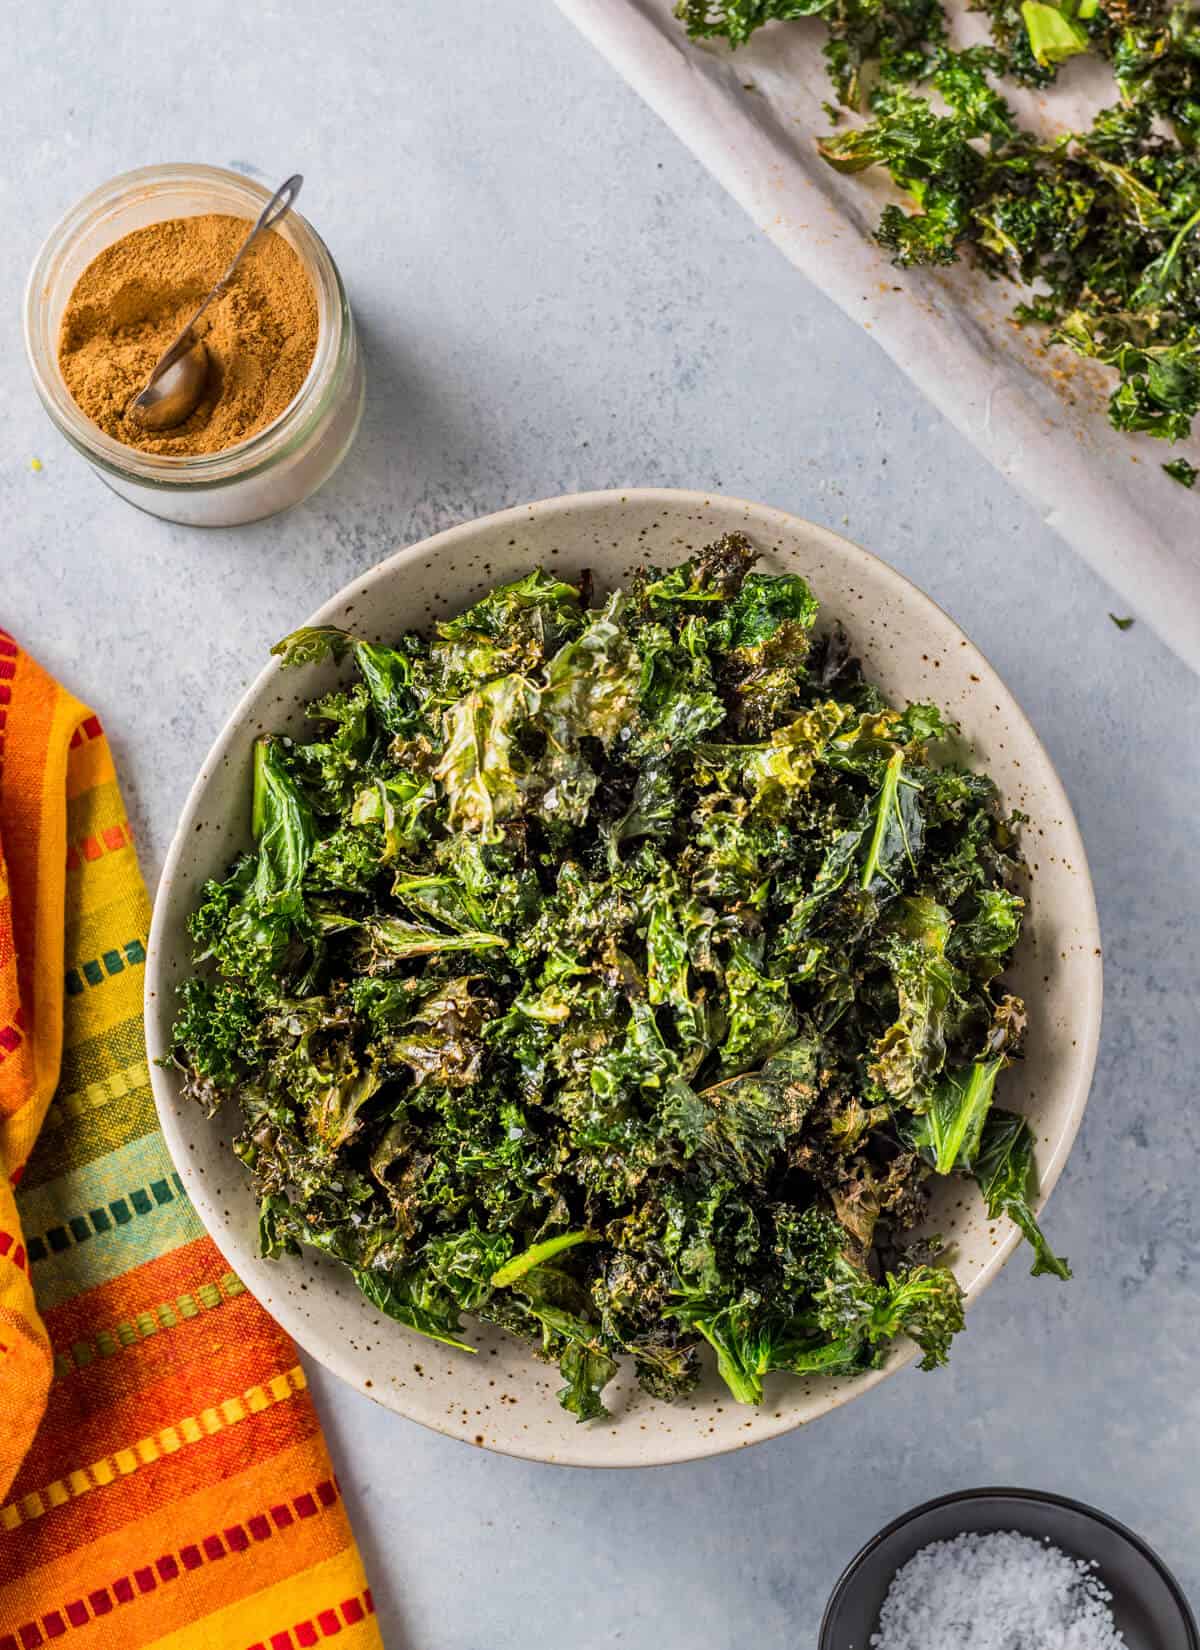 Kale chips in bowl with salt and chaat masala on the side